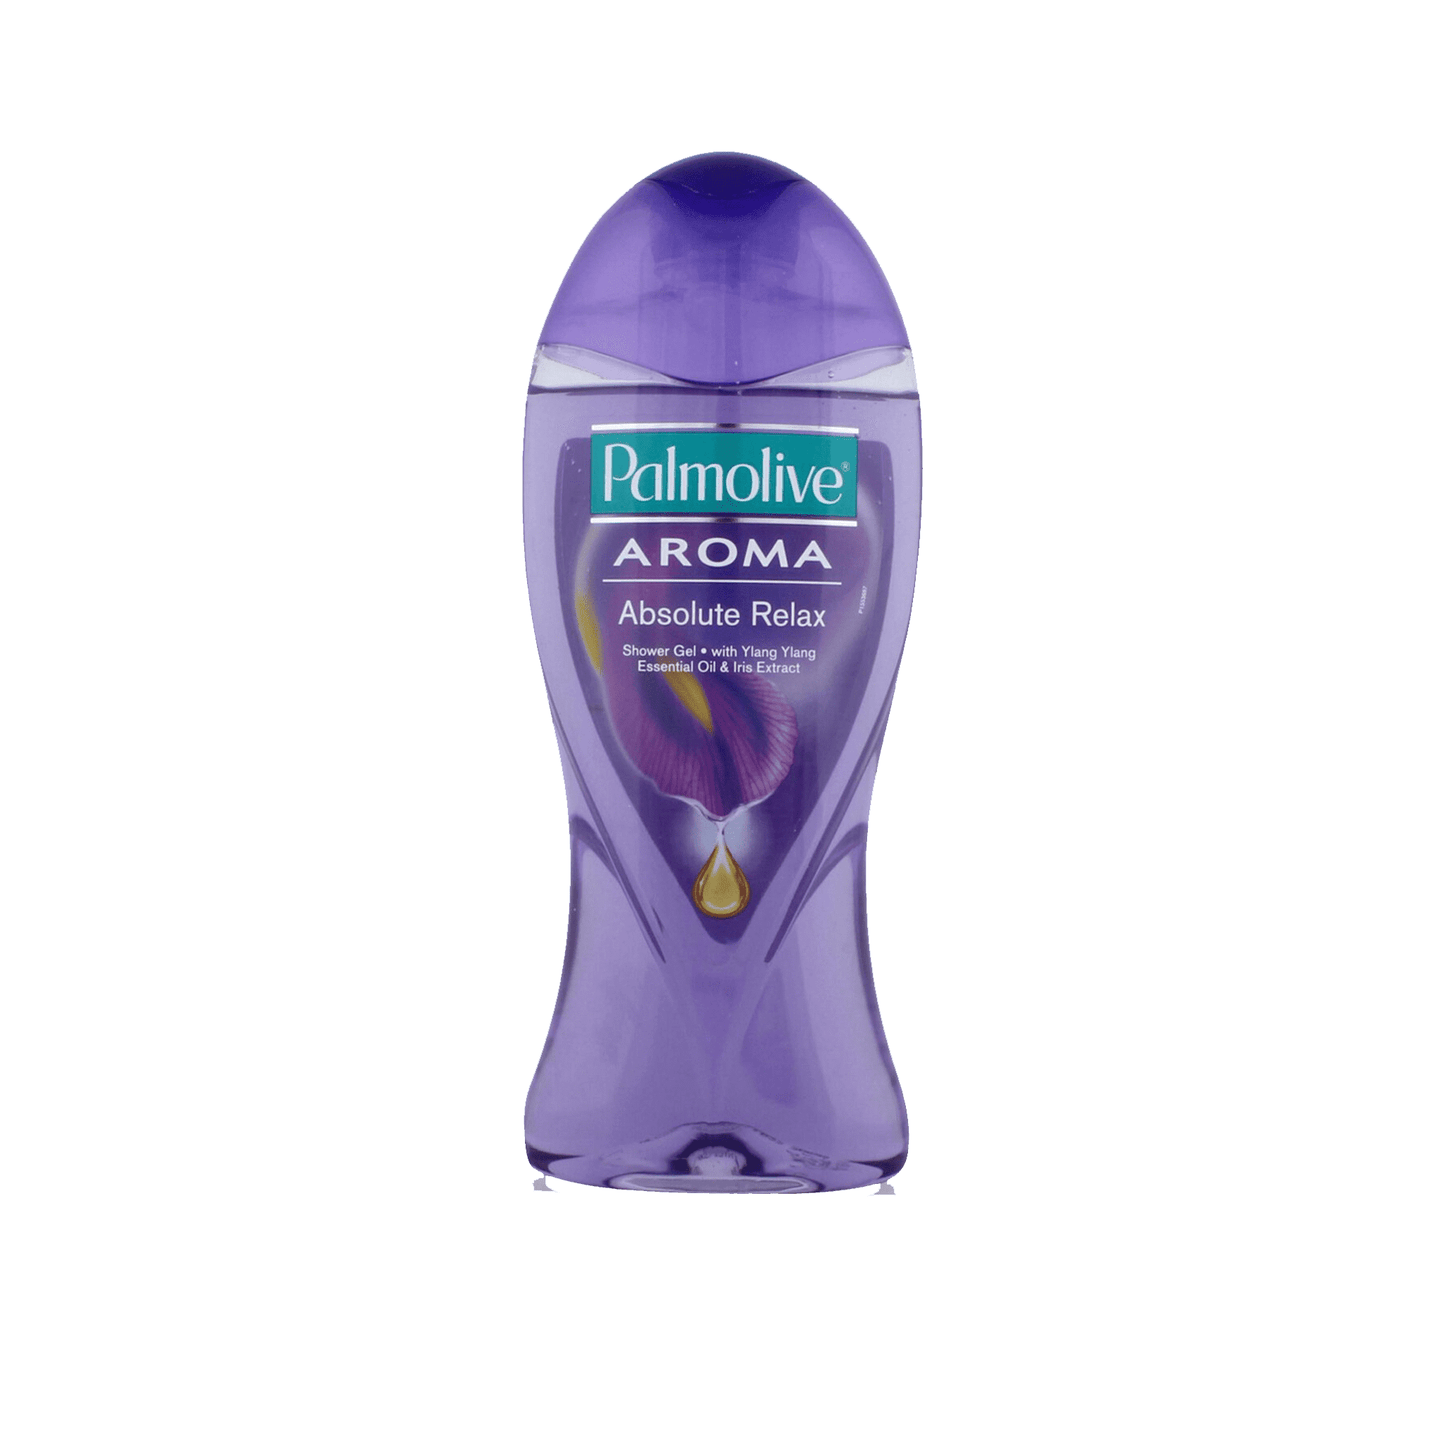 Palmolive Shower Gel - Aroma, Absolute Relax.